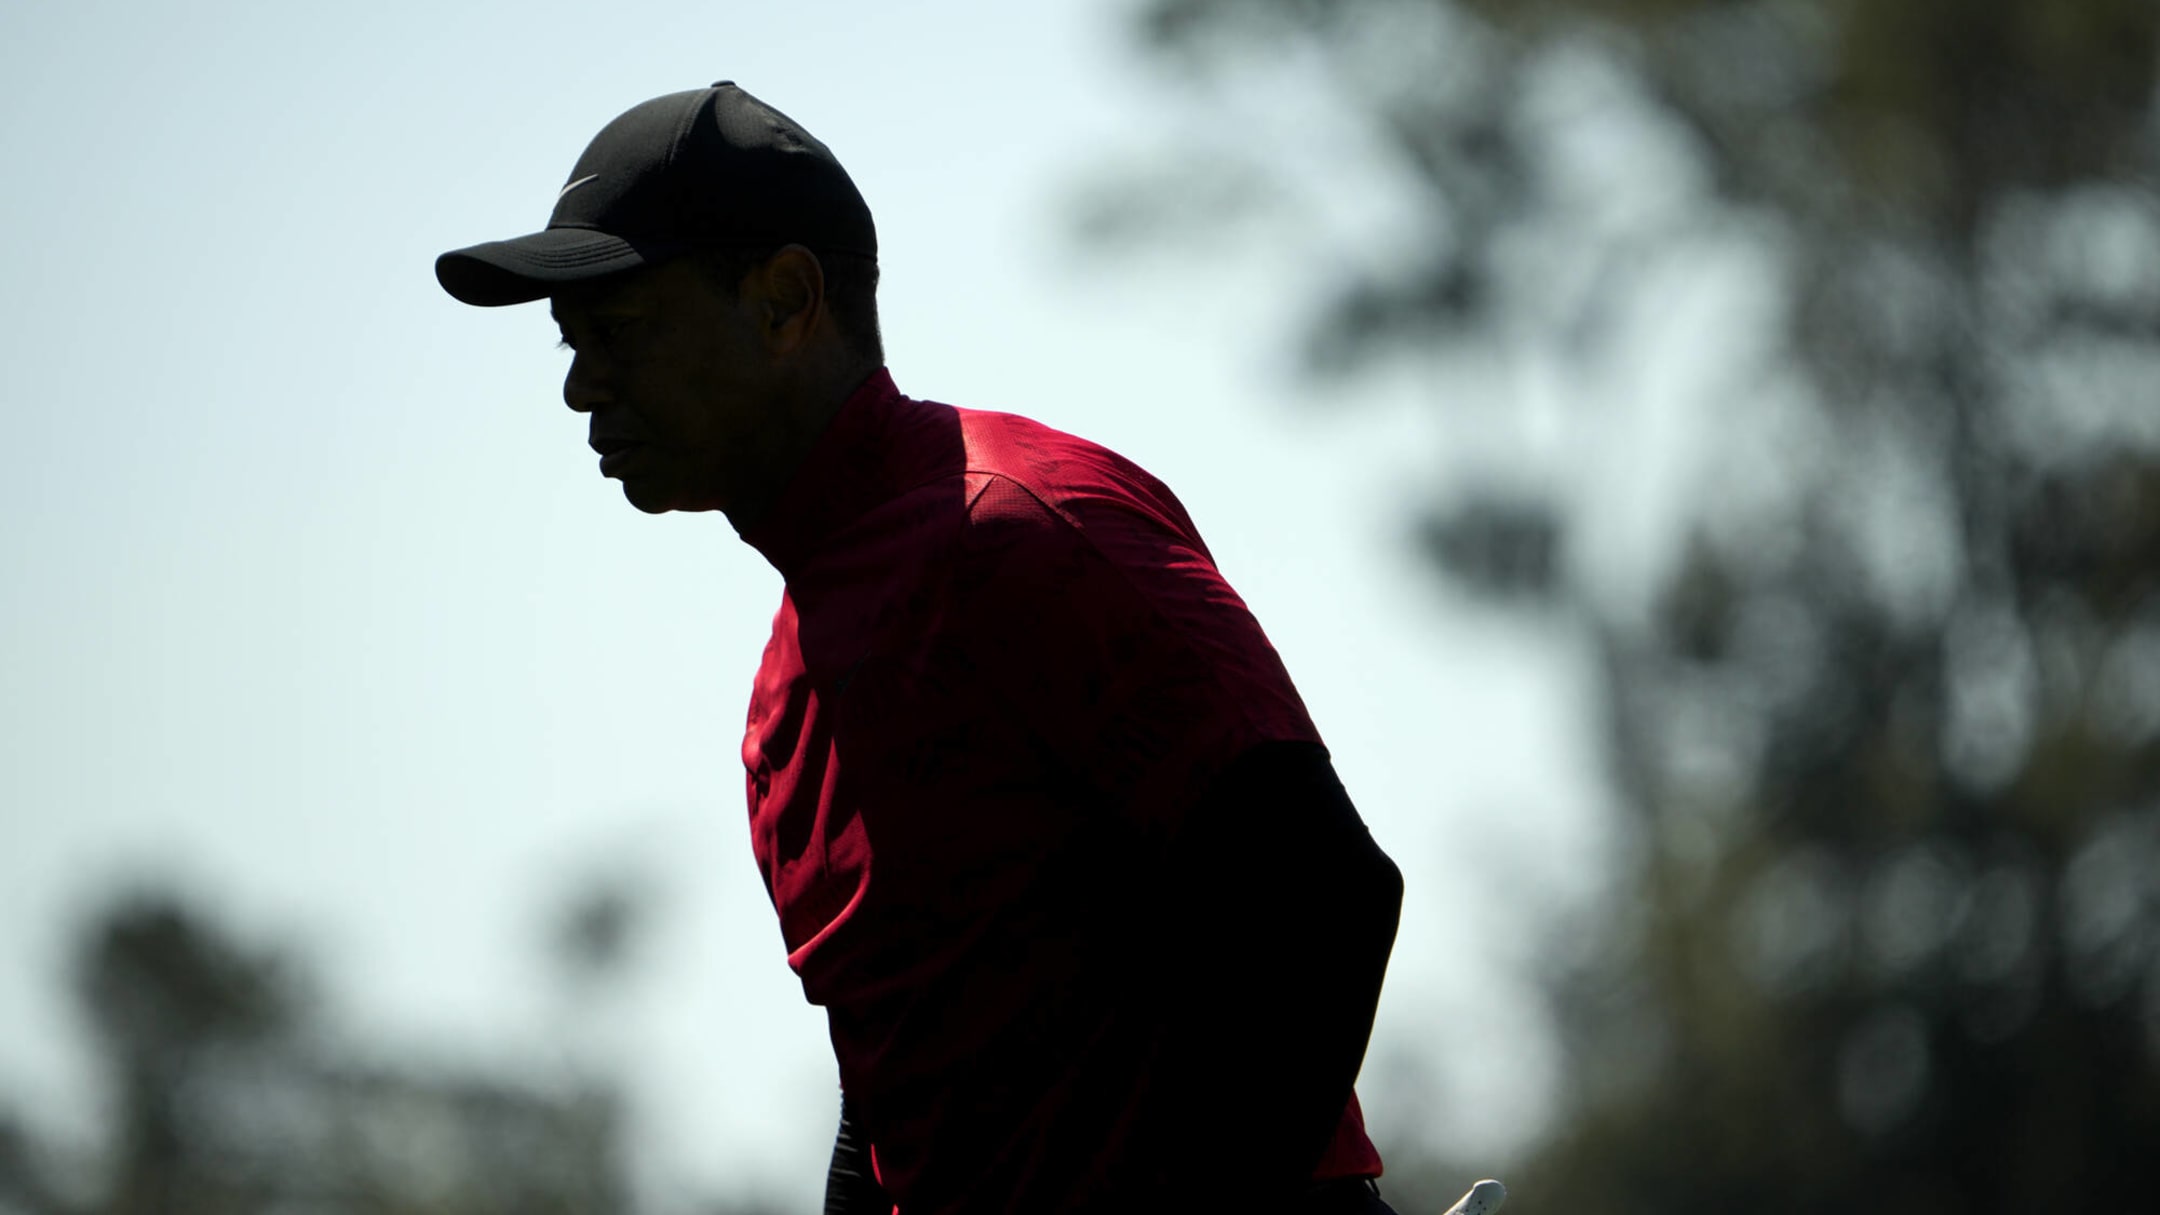 Tiger Woods Masters odds: How realistic are his chances to win a